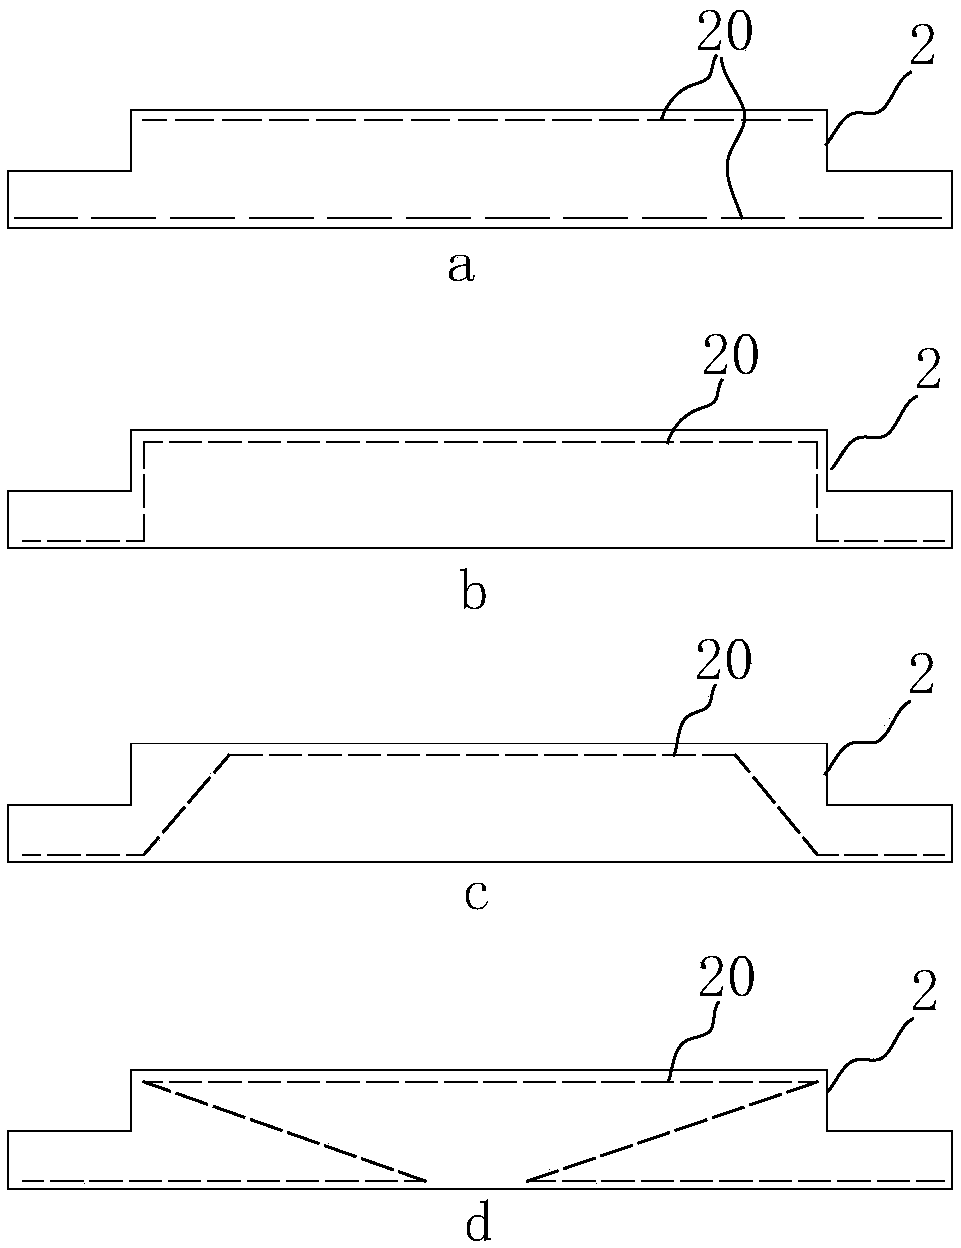 Processing method for dry-jointed assembled partition boards